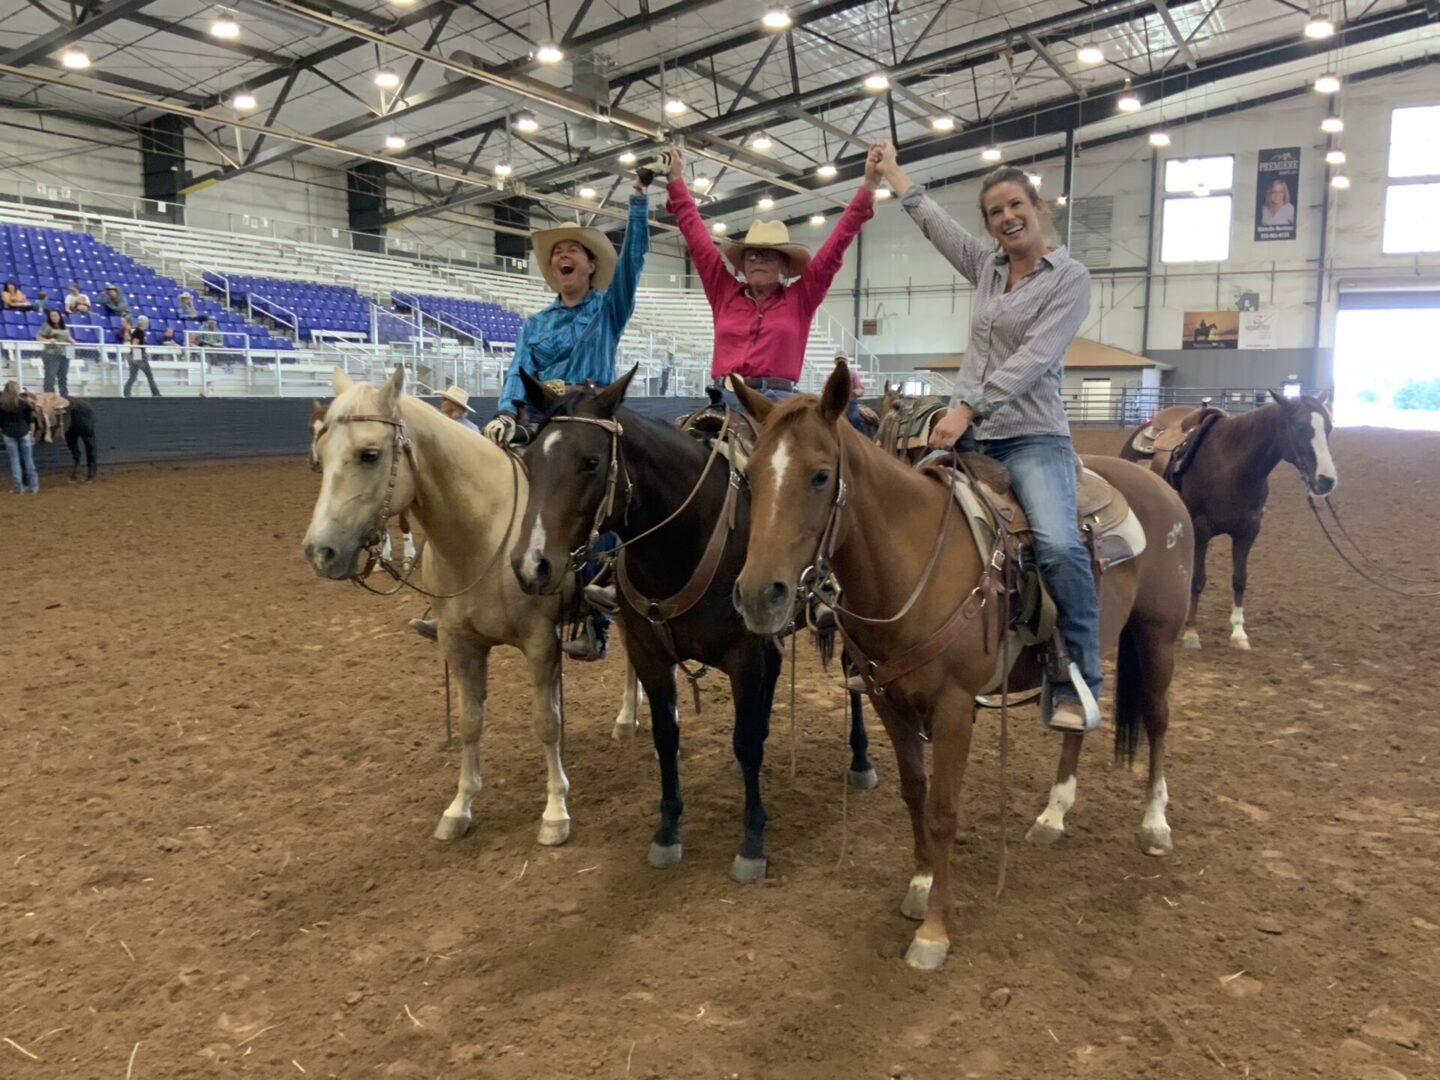 Three women riding horses in a dirt arena.